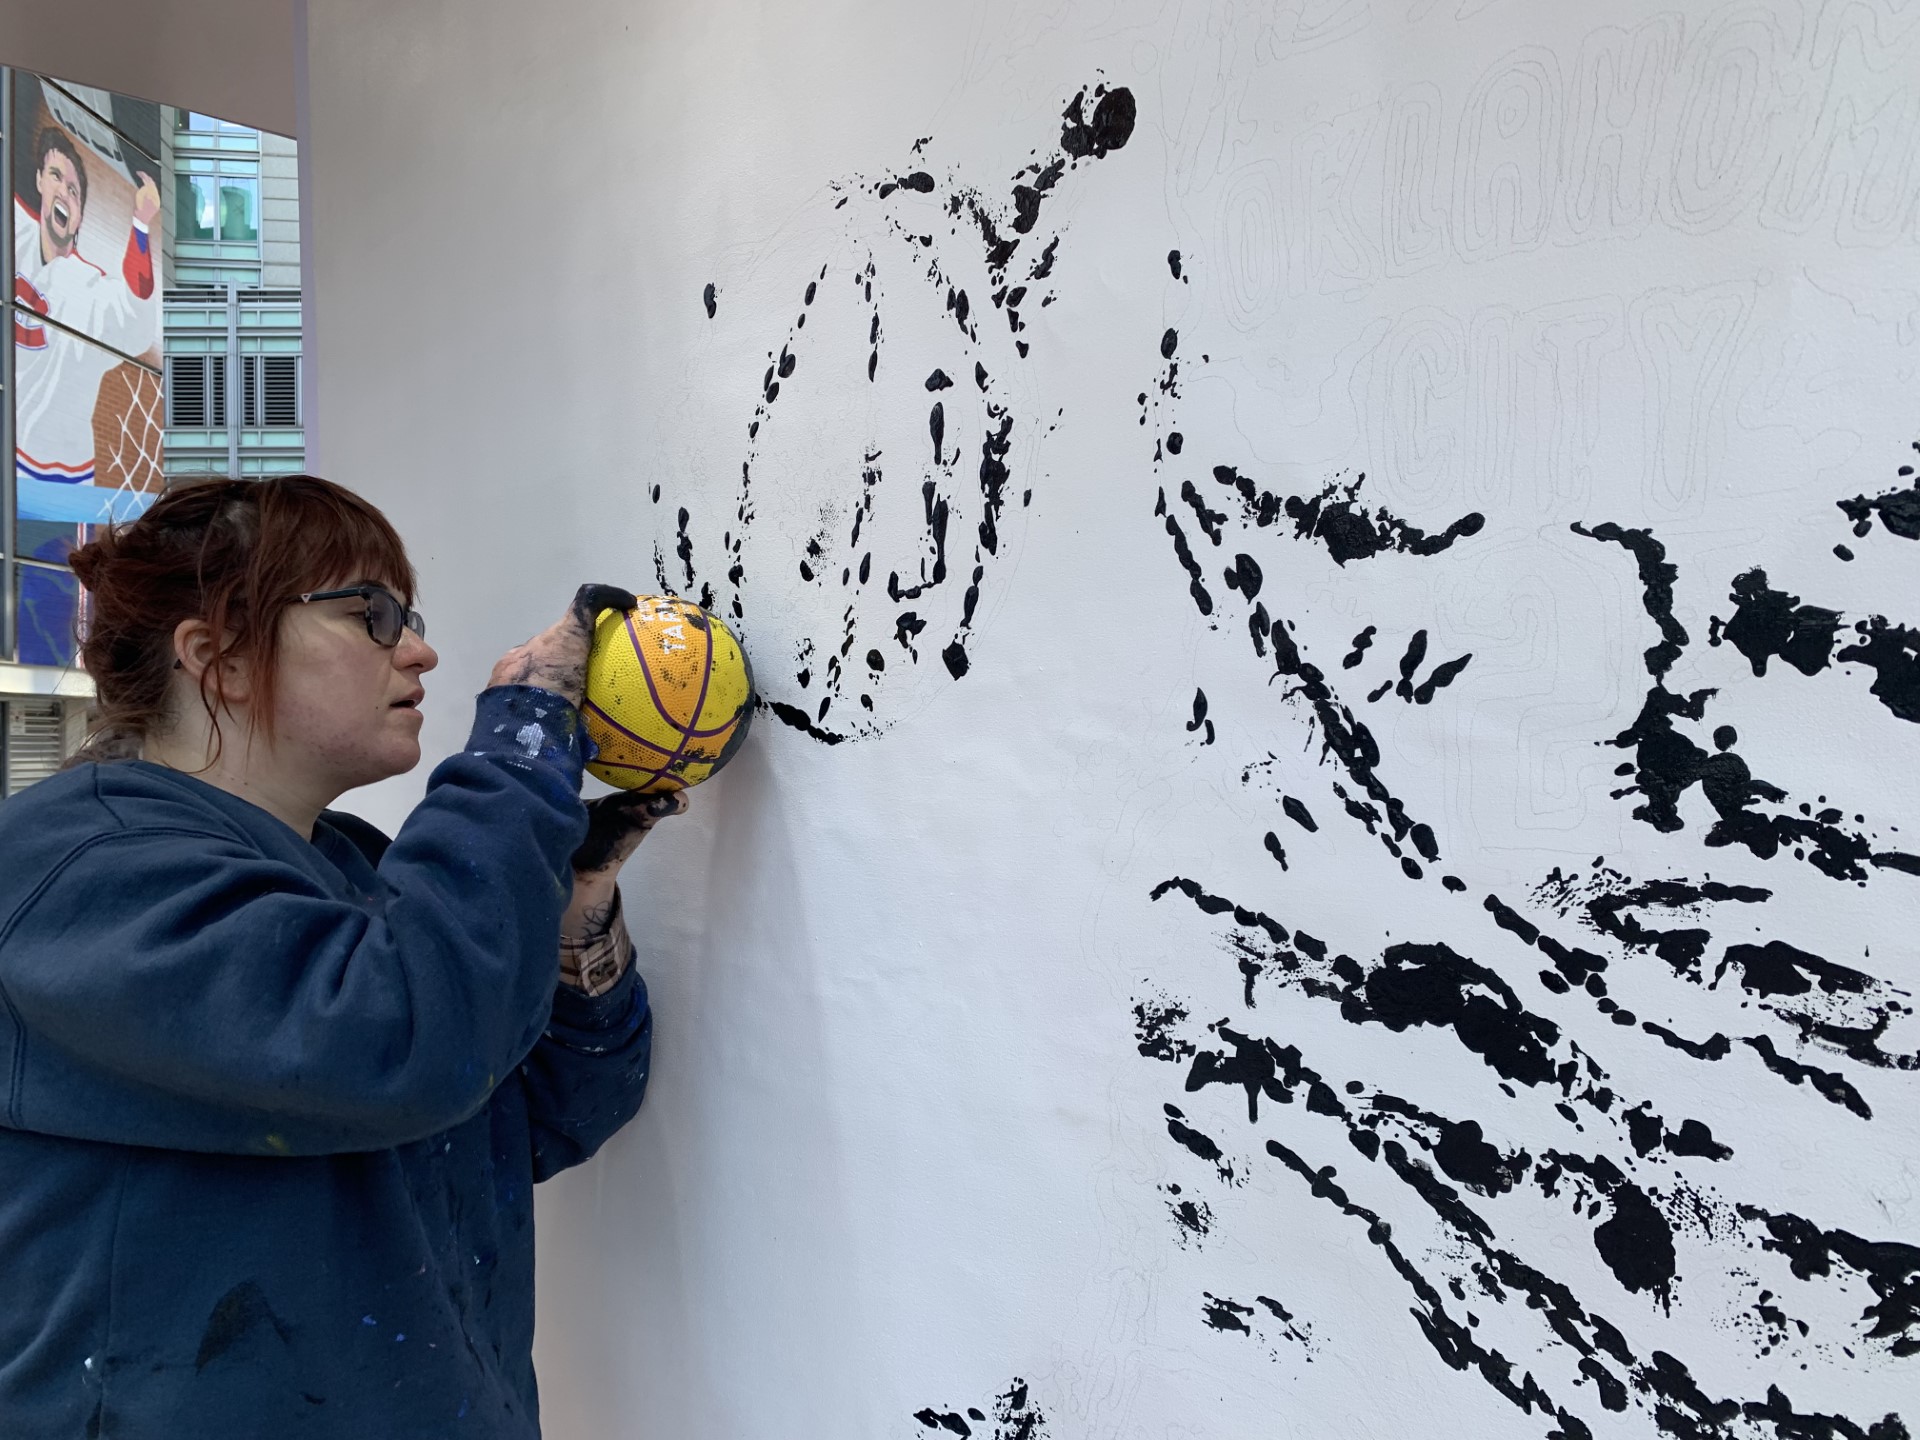 Montreal artist Samantha Woj attracting attention for use of sports equipment as brushes